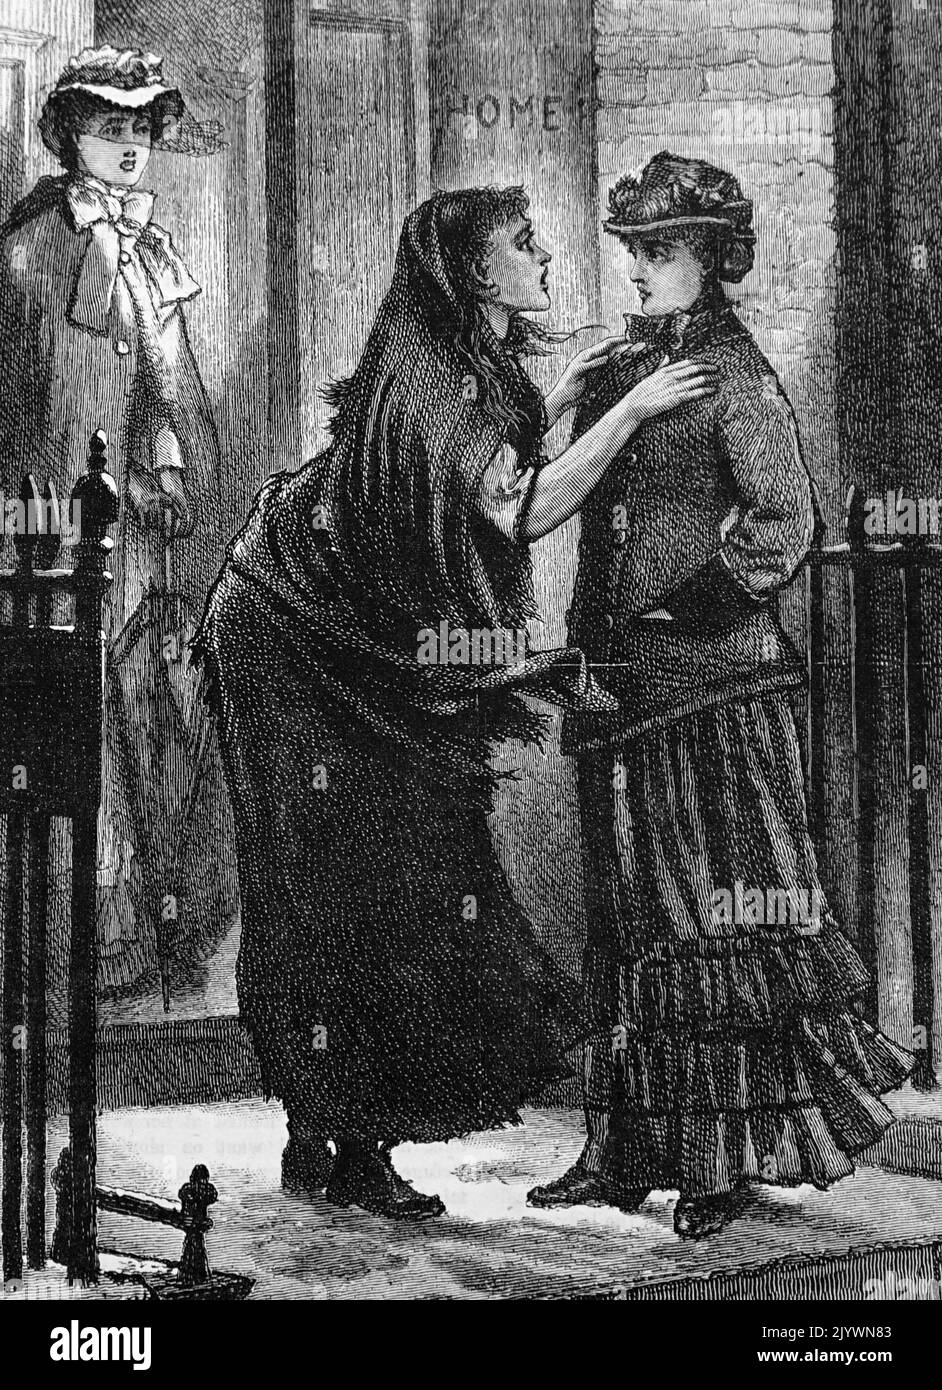 Illustration depicting a homeless woman pleading for shelter at a women's refuge in London. Dated 19th Century Stock Photo